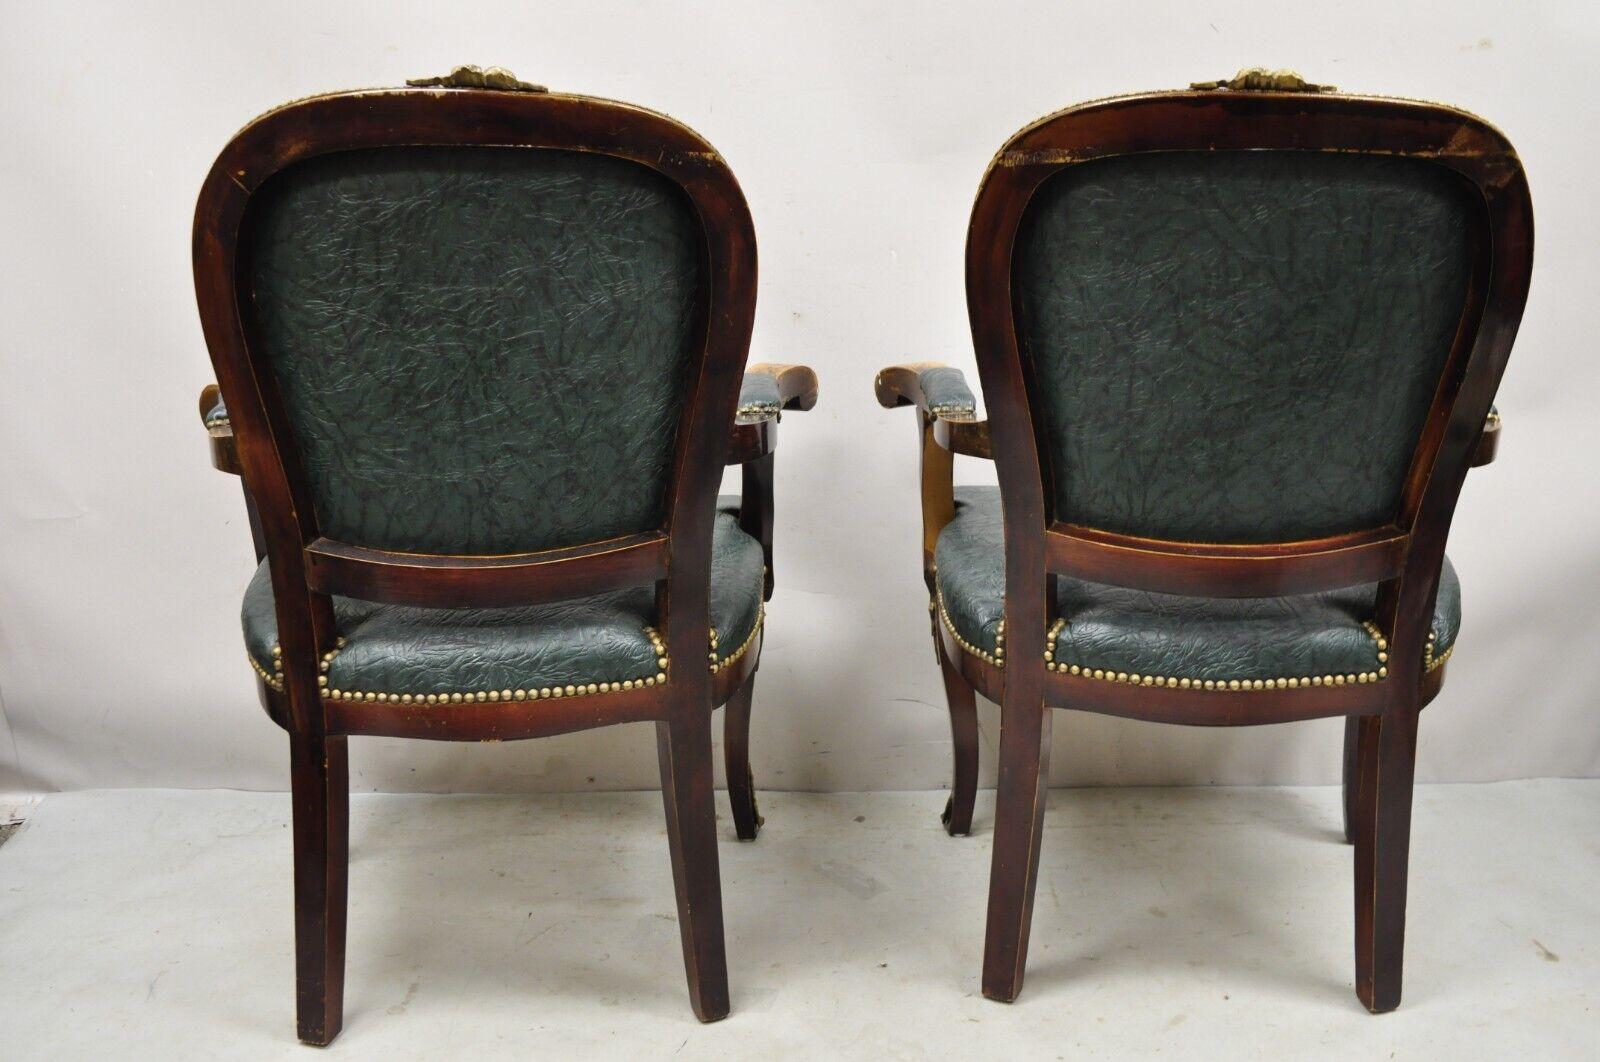 Vintage French Louis XV Style Solid Wood Bronze Ormolu Arm Chairs - a Pair For Sale 5